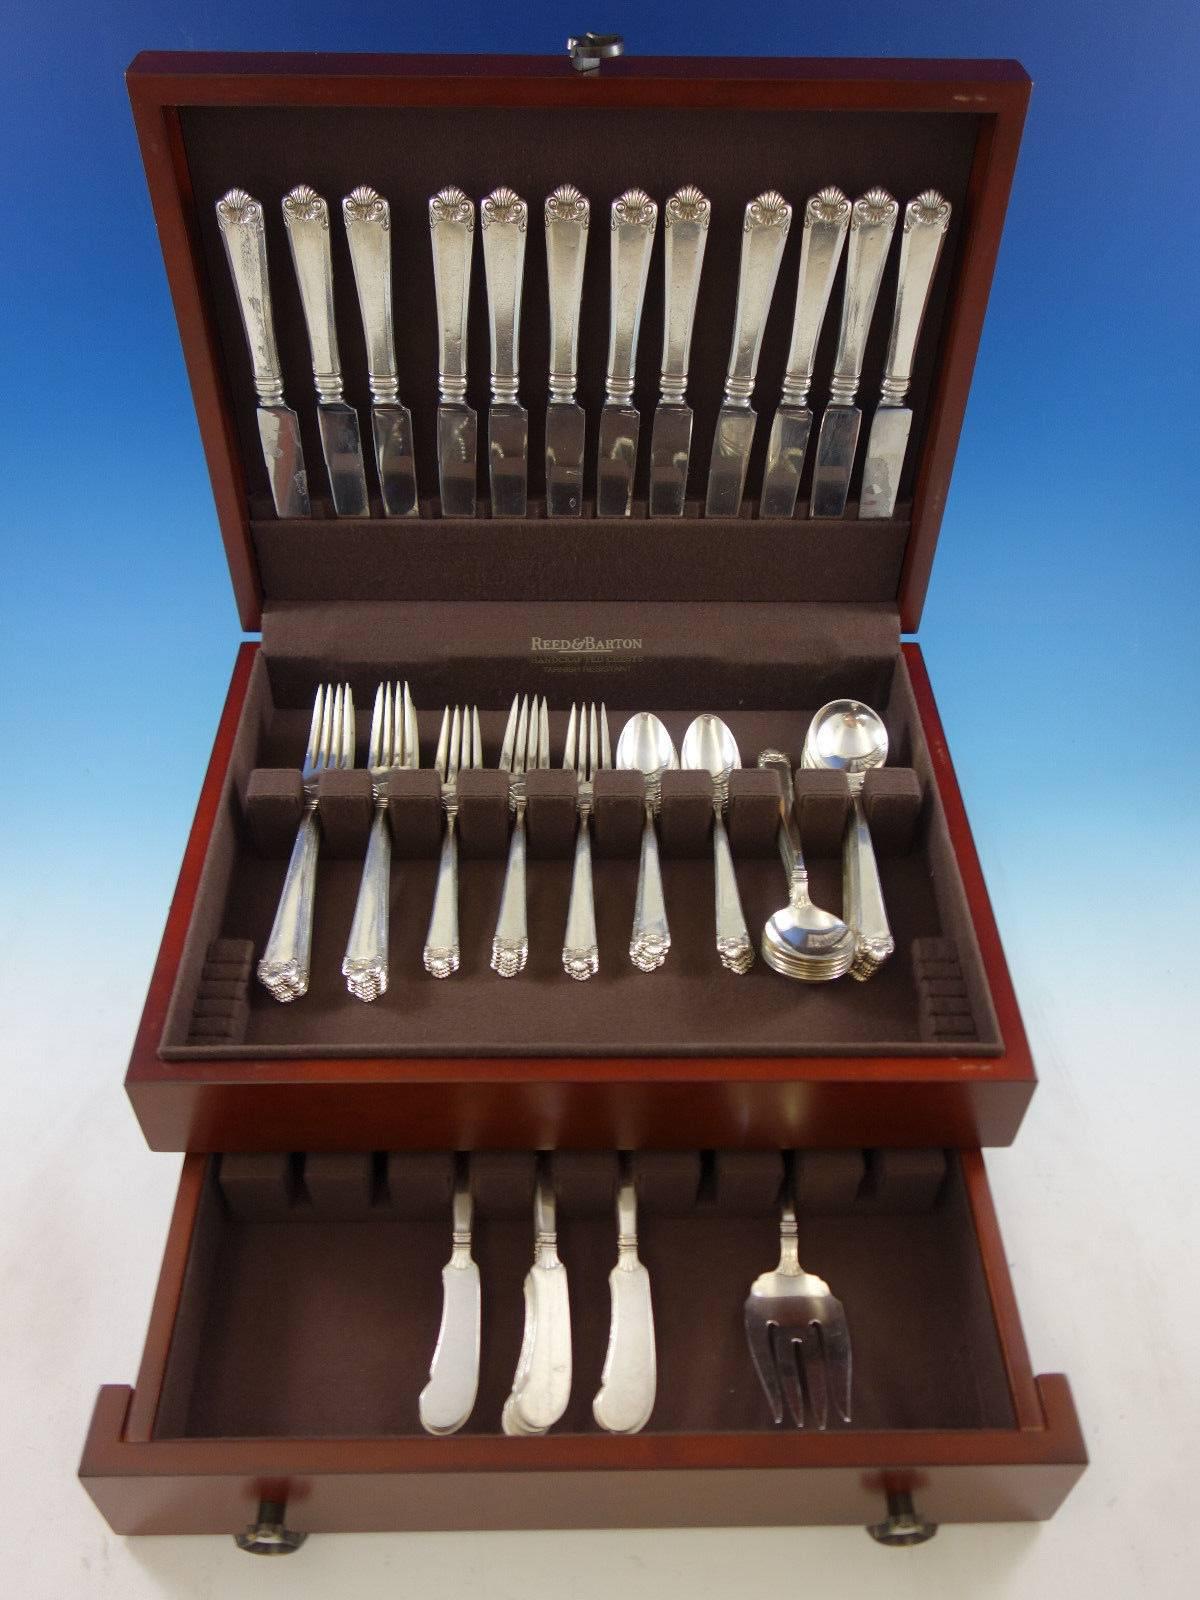 George II by Watson sterling silver flatware set, 73 pieces. This set includes: 

12 knives, 9